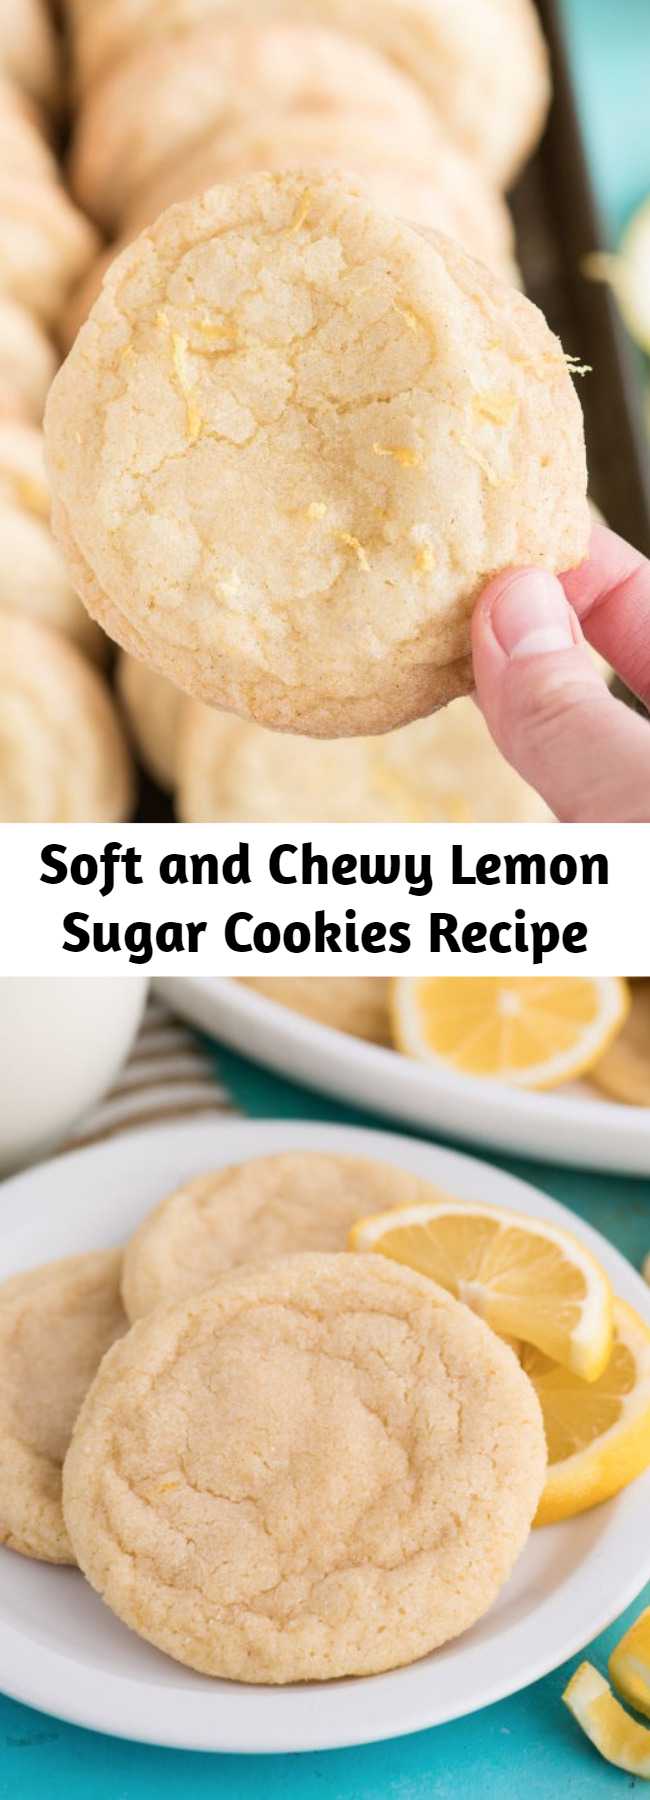 Soft and Chewy Lemon Sugar Cookies Recipe - Soft and Chewy Lemon Cookies are a crowd favorite cookie that you can make anytime of the year. These lemon sugar cookies are thick and chewy and easy to freeze. Easy to make in one bowl with fresh lemon and everyday ingredients.